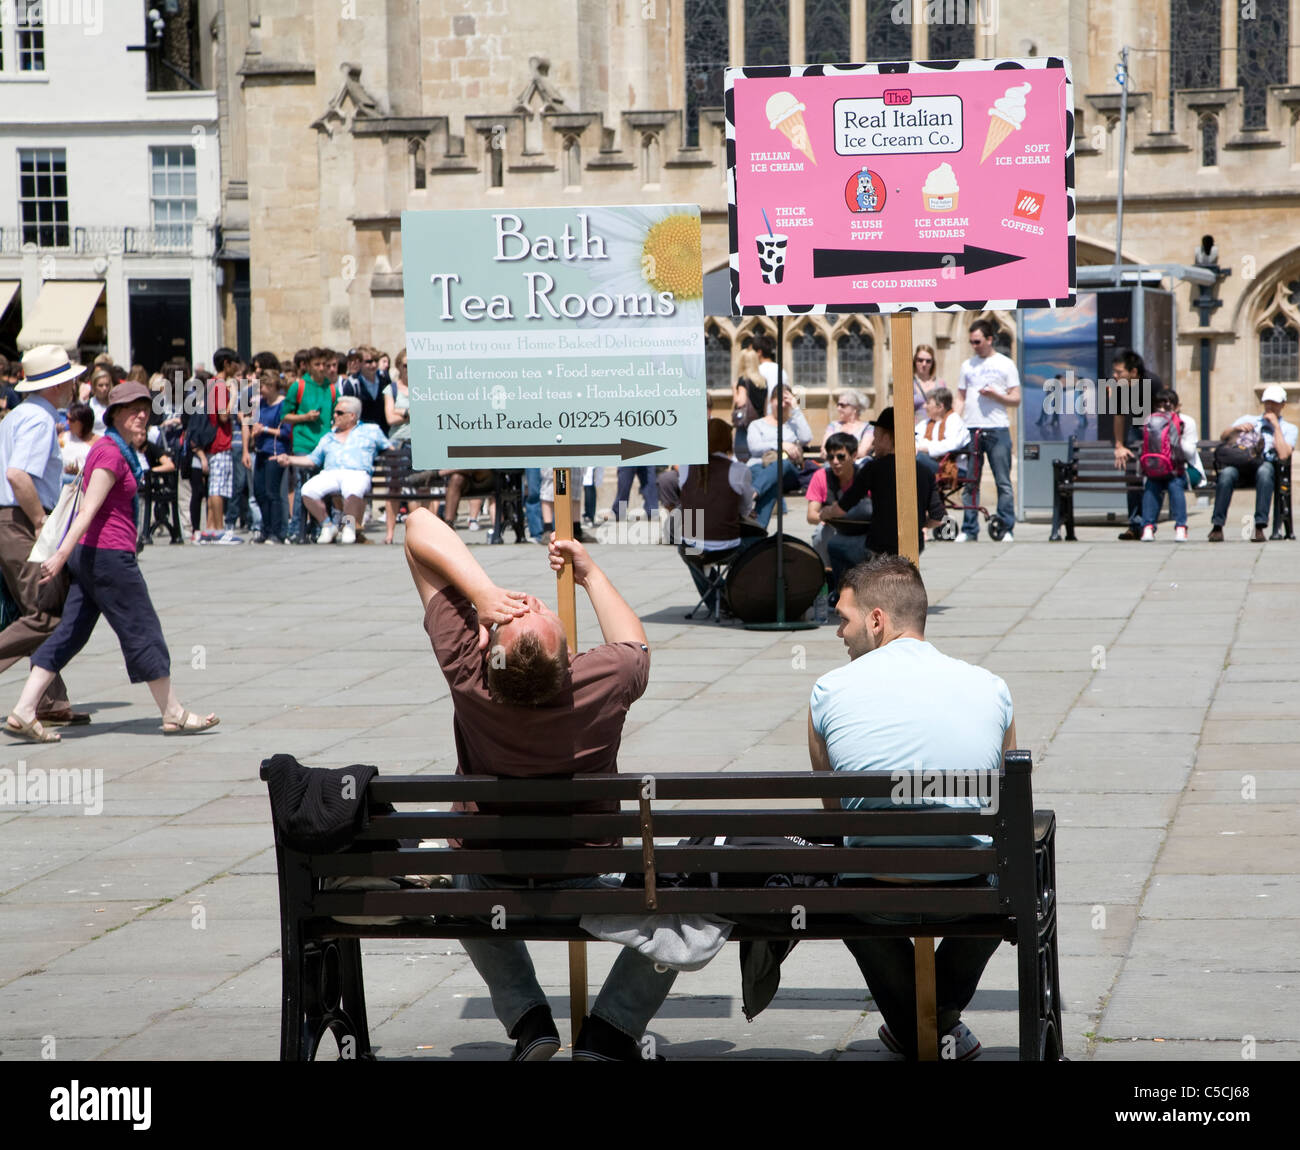 Men holding advertising boards sit on bench in the Abbey churchyard, Bath, England Stock Photo